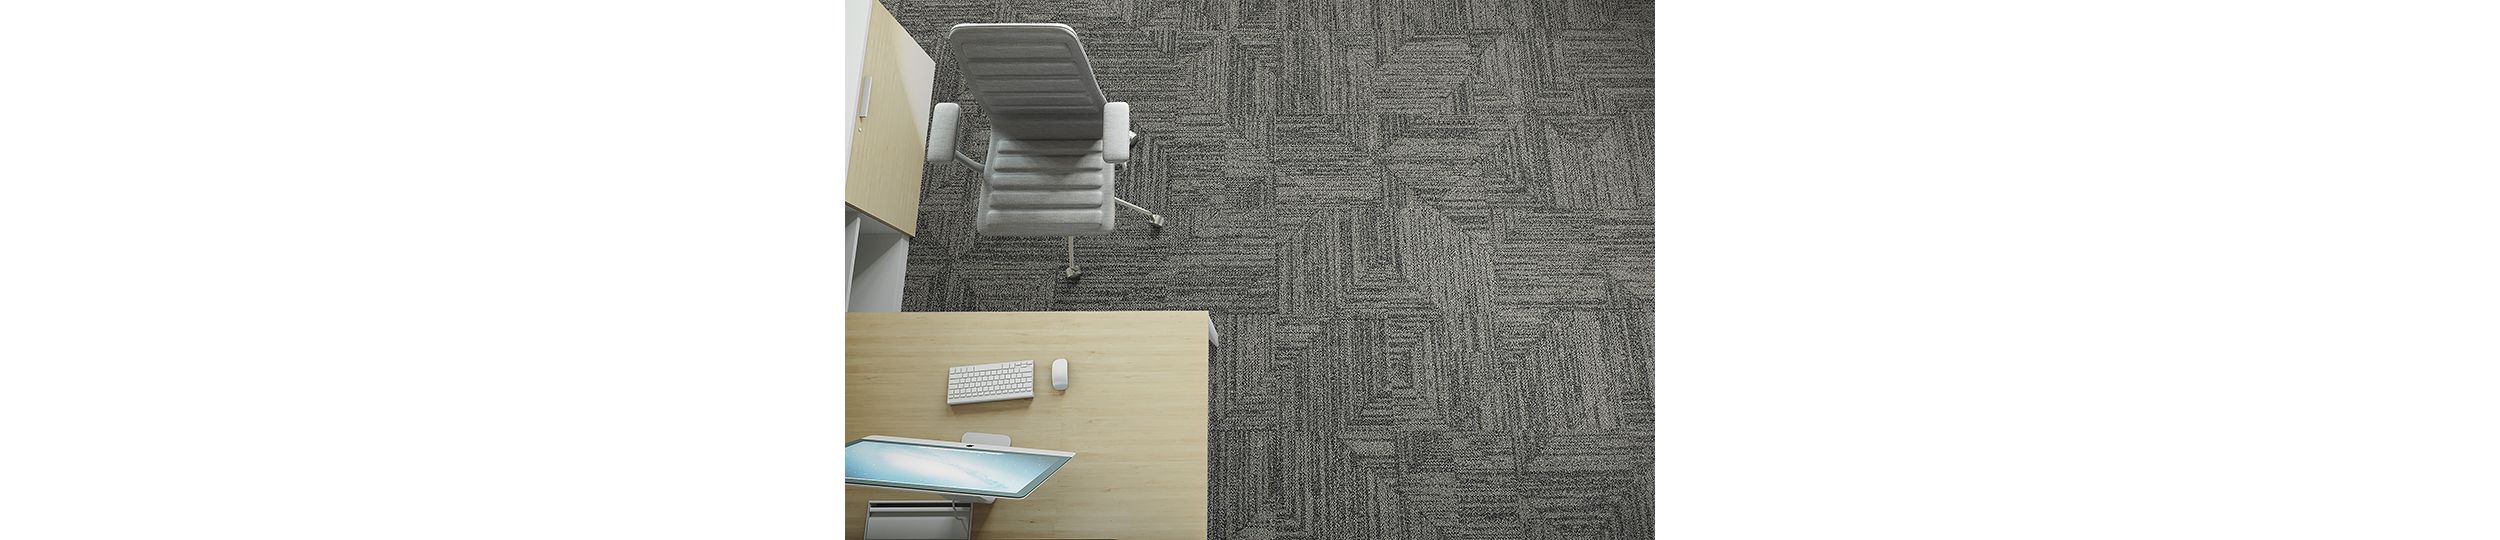 Interface Open Air 403 carpet tile in overhead view with wood work desk and file cabinet Bildnummer 3